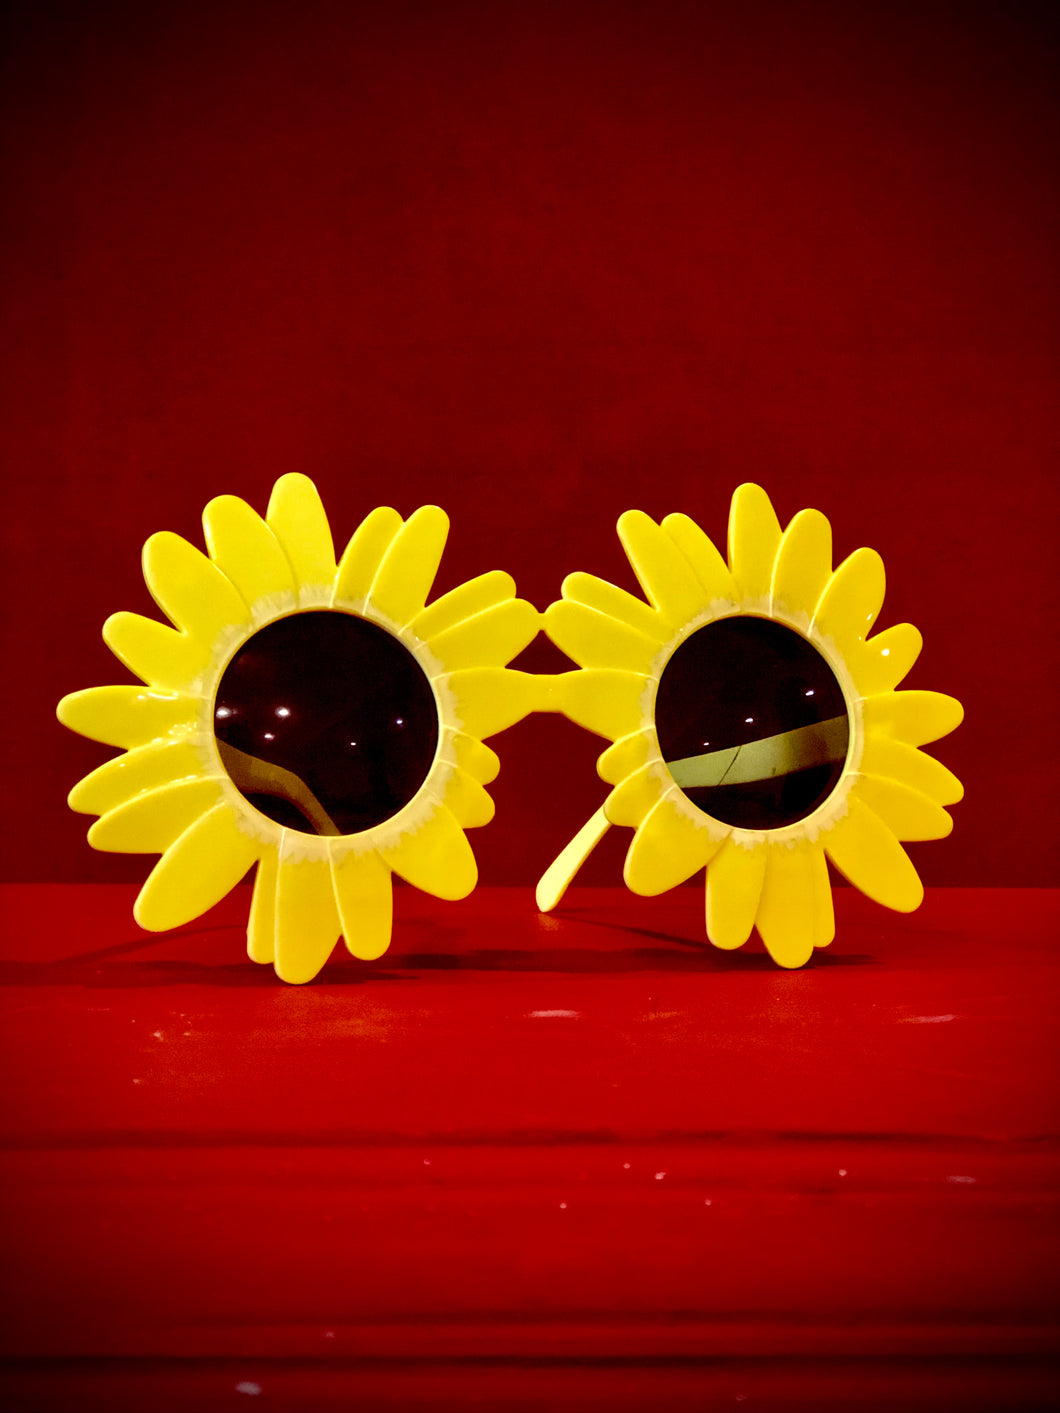 Official Art the Clown Sunflower Sunglasses- Win a Signed 11x17 Poster with Your Order